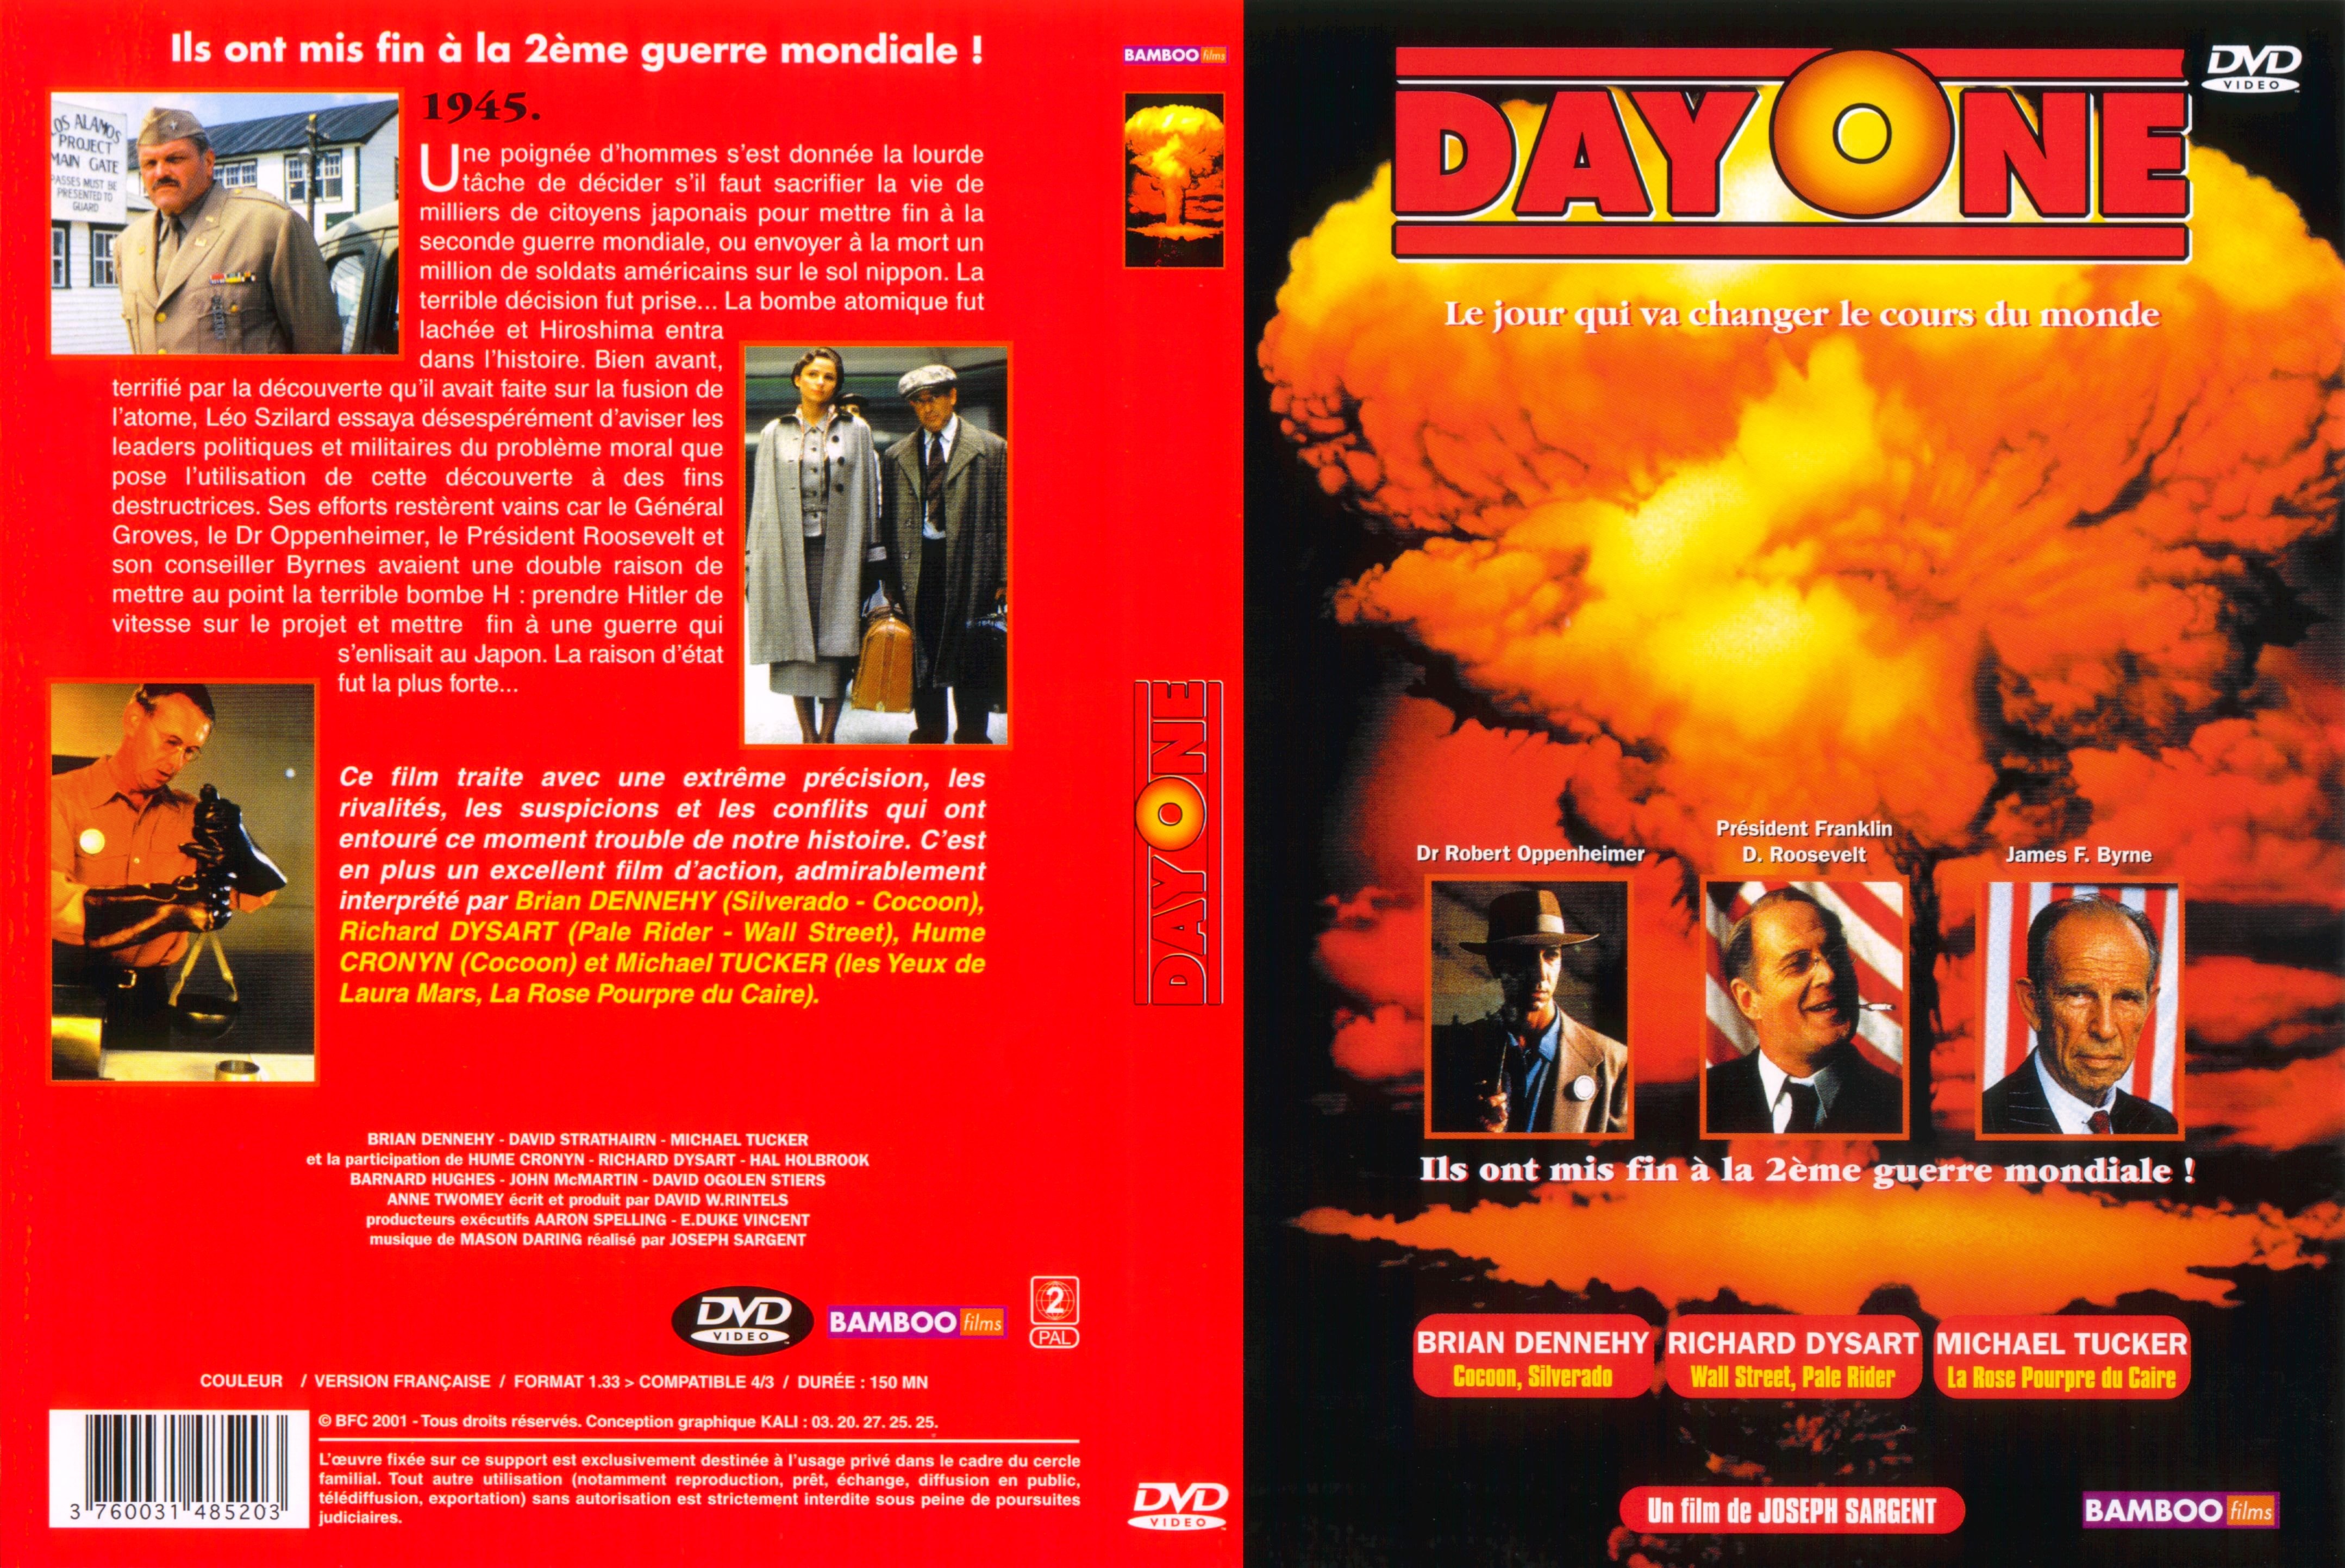 Jaquette DVD Dayone